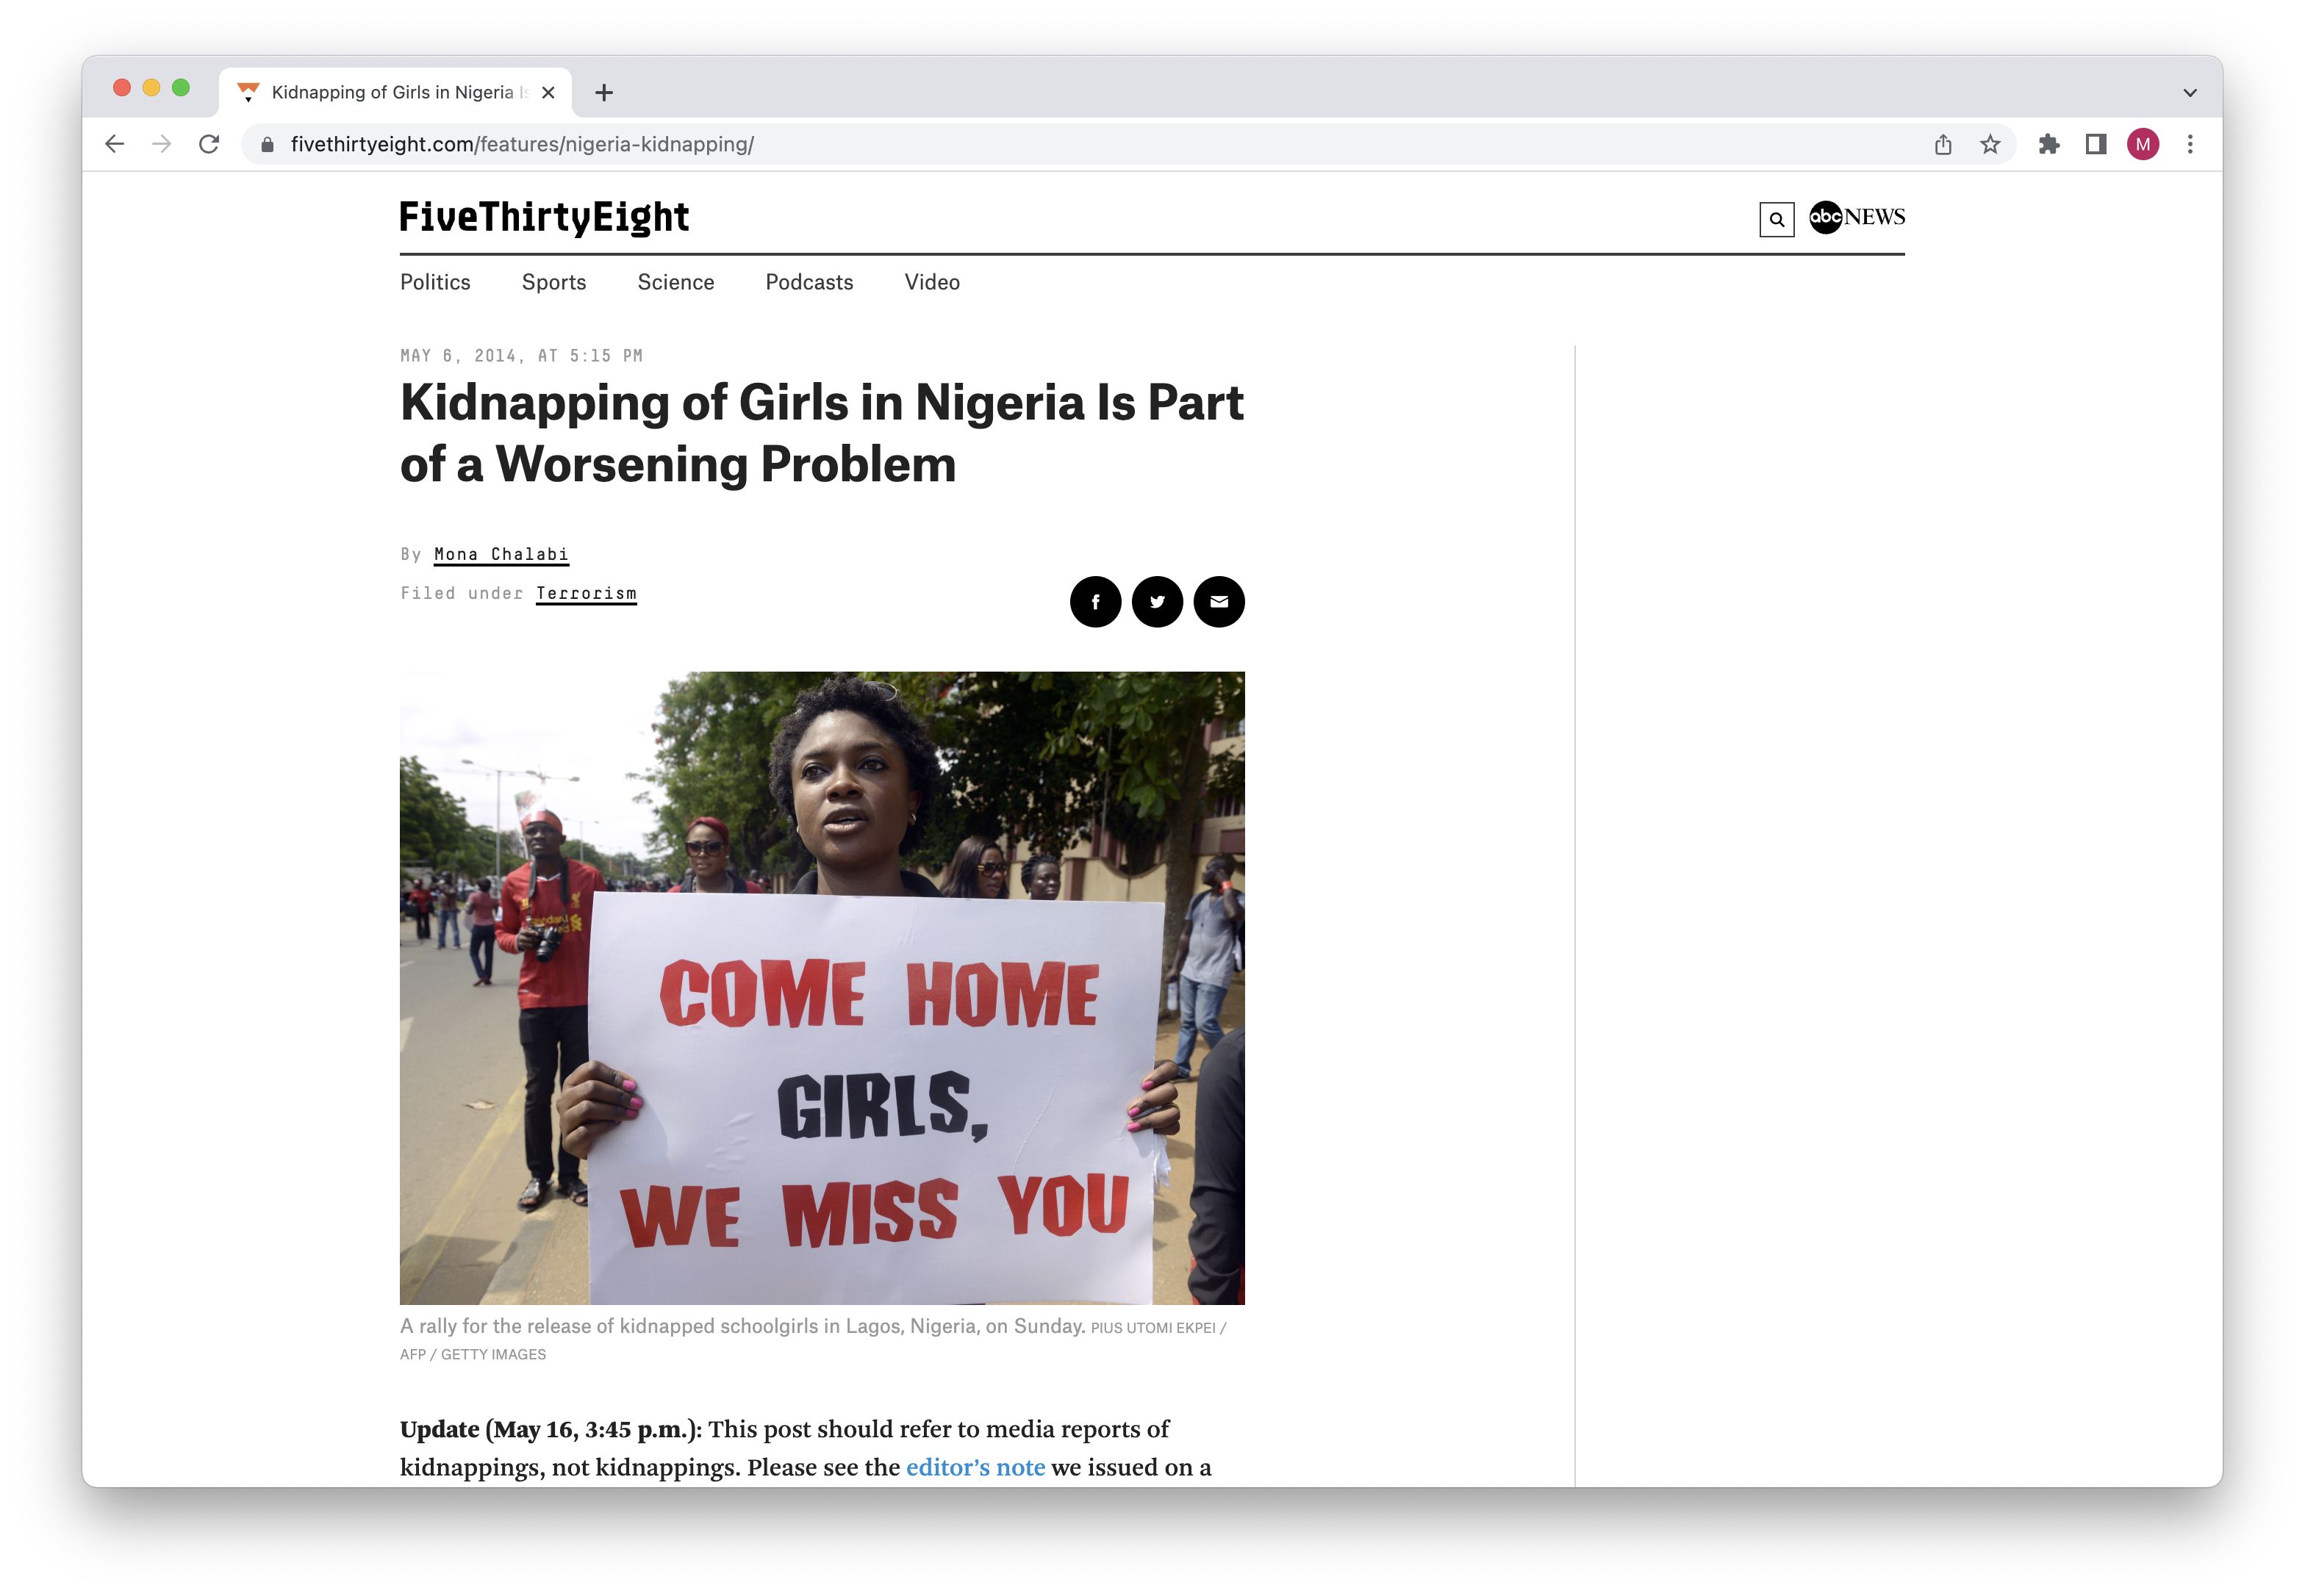 A web browser displaying the article 'Kidnapping of Girls in Nigeria Is Part of a Worsening Problem' on fivethirtyeight.com